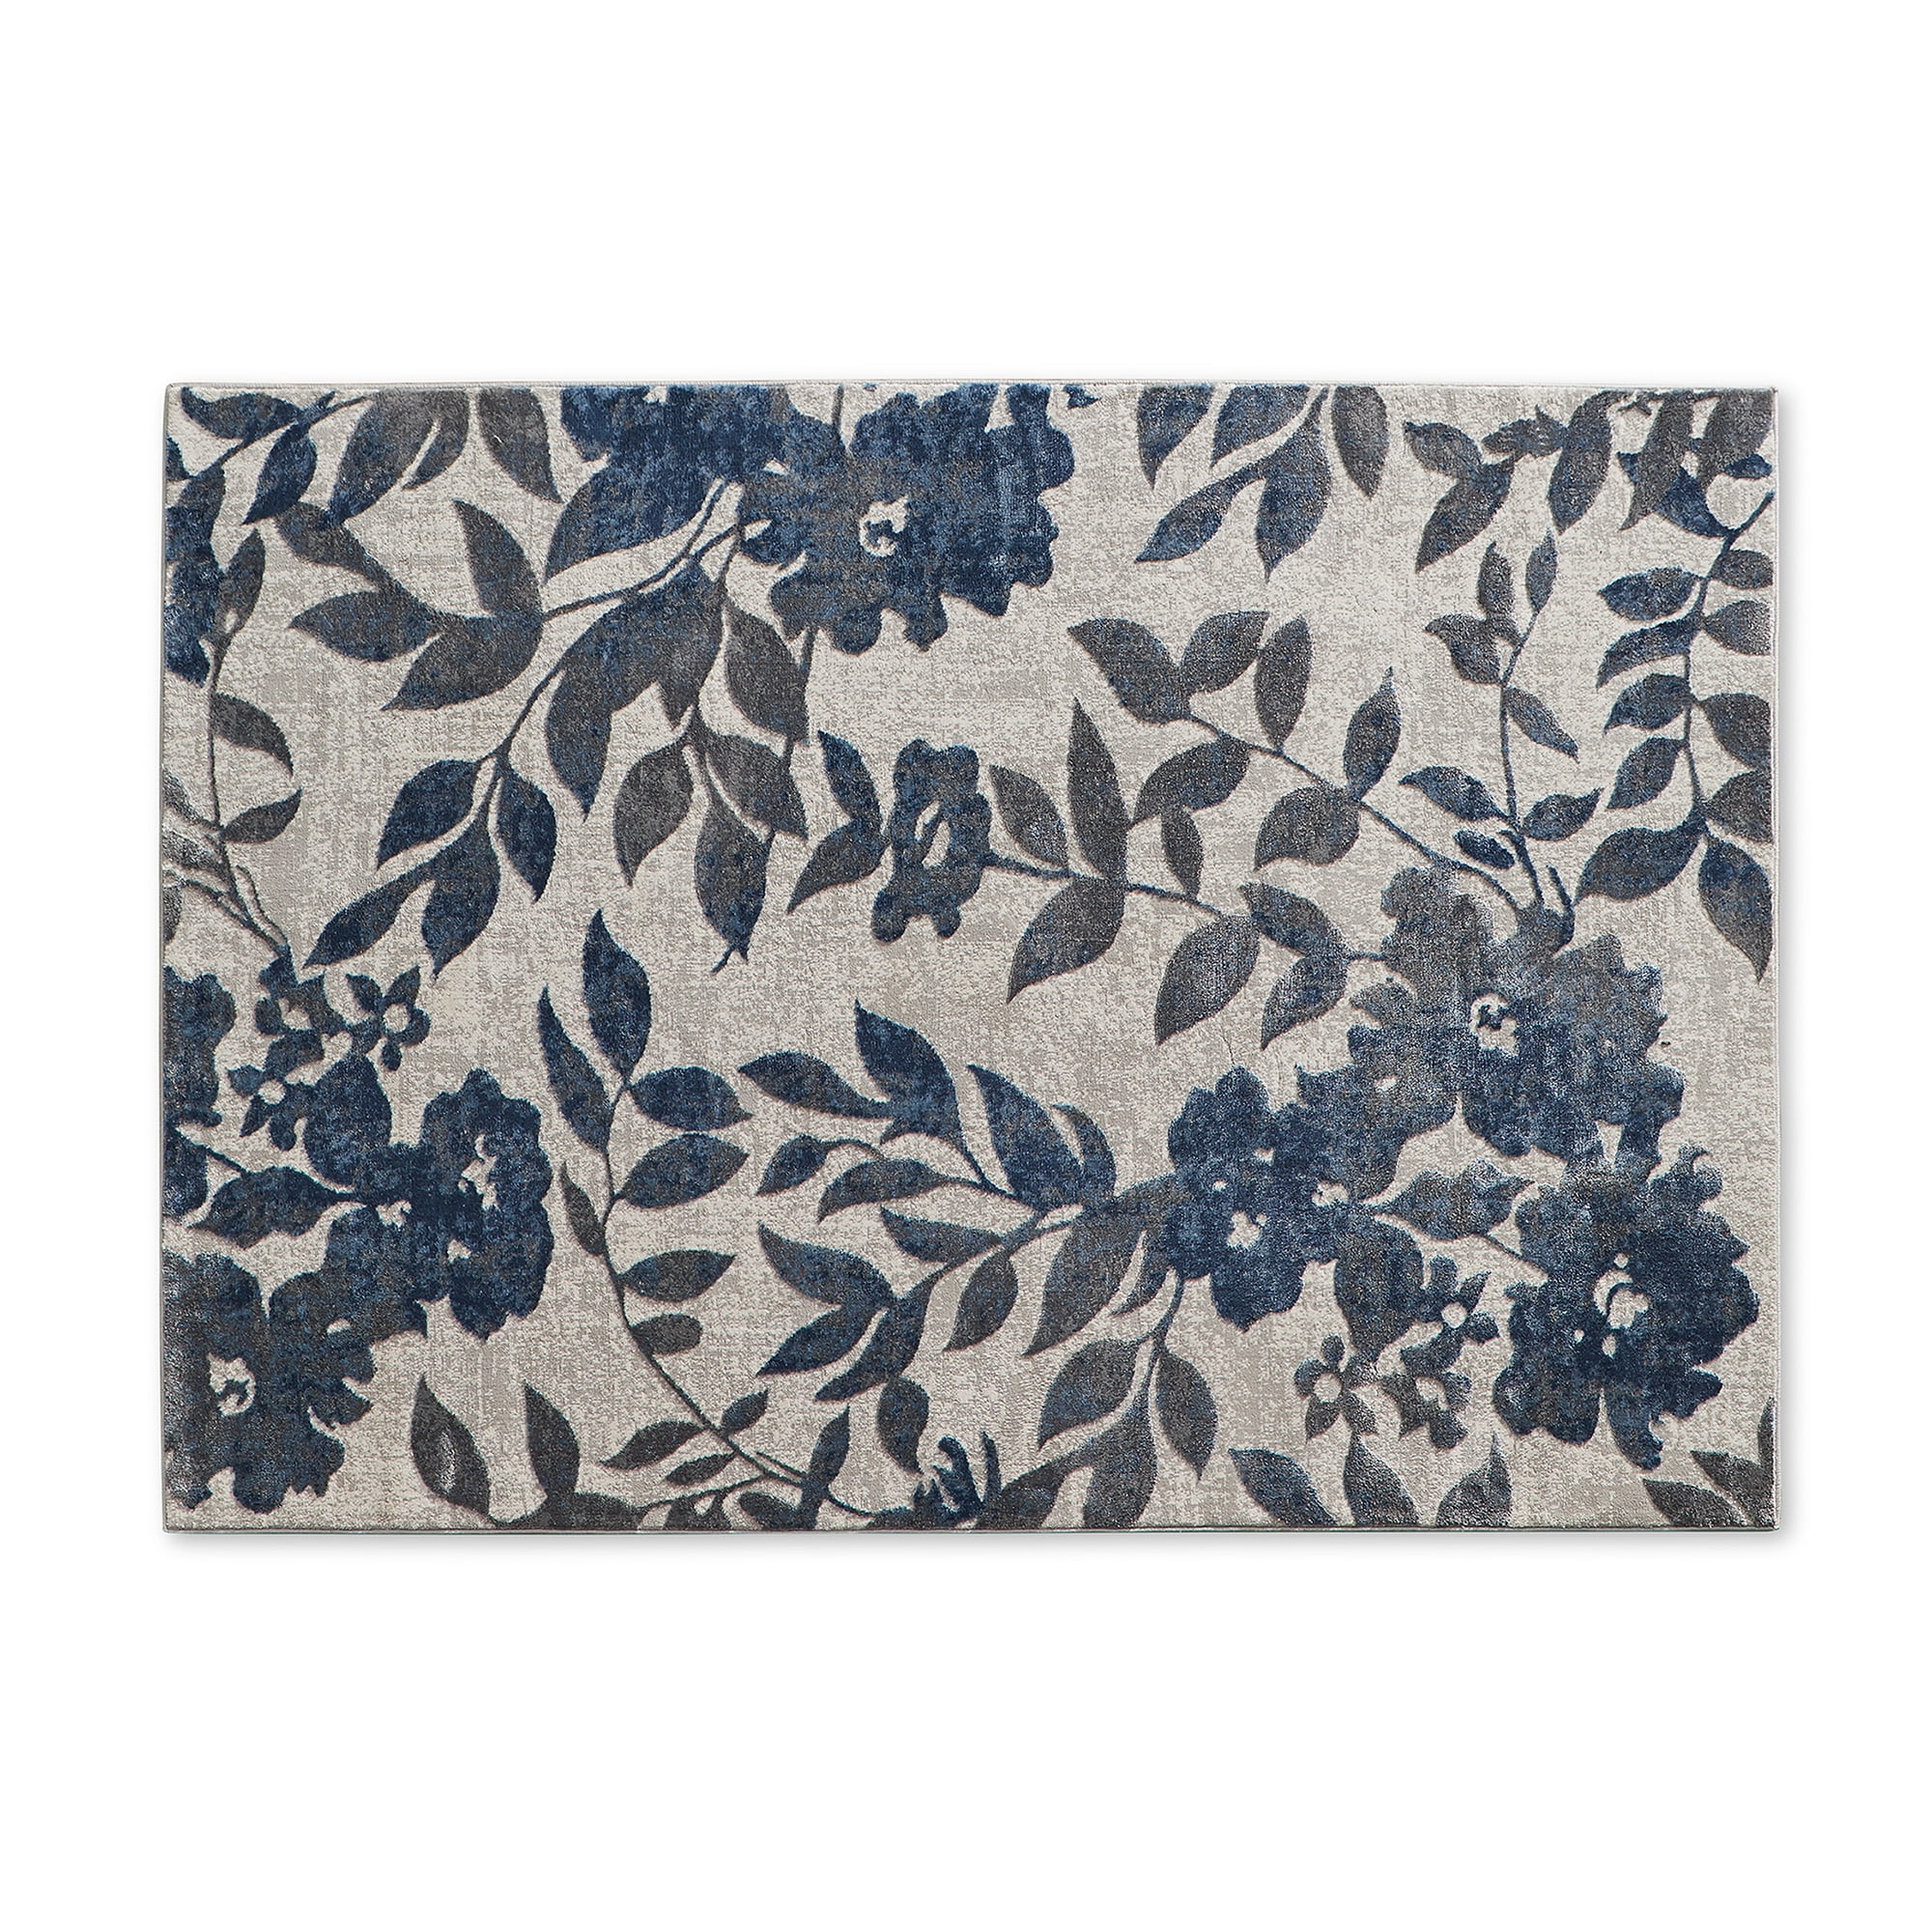 Better Homes & Gardens Blue & Gray Botanical Blooms, Area Rug, 5' x 7'